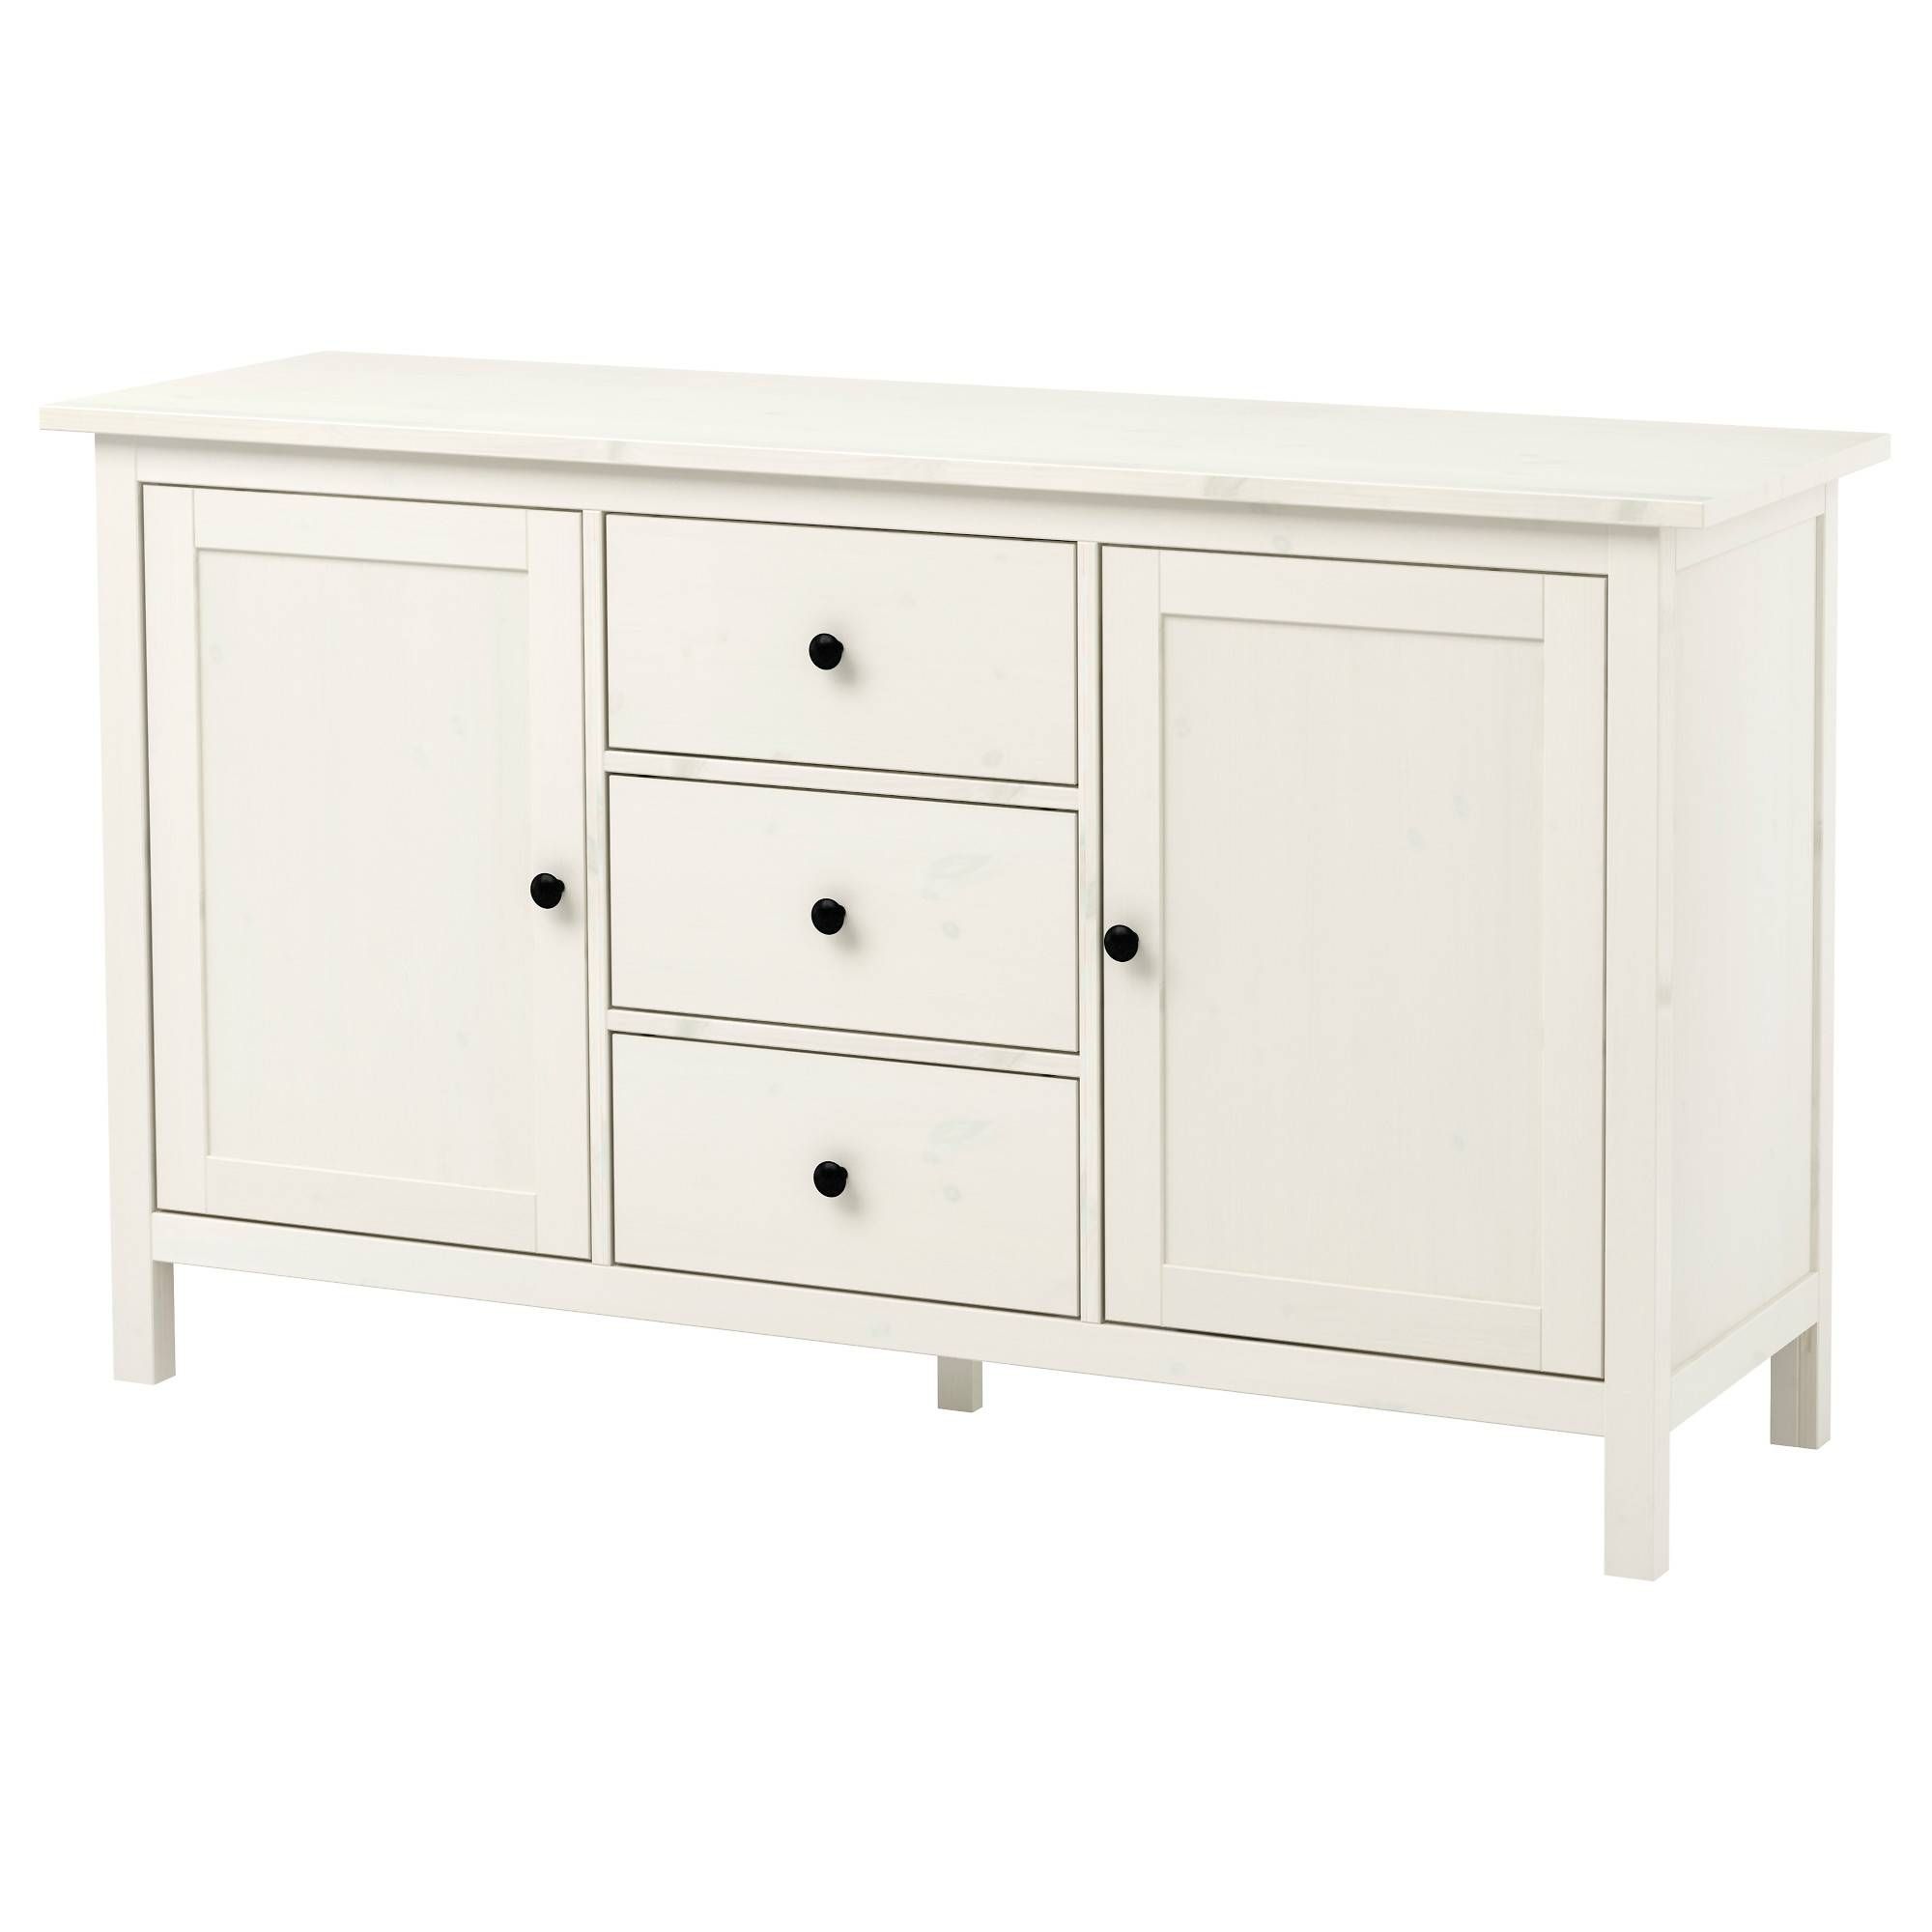 Sideboards & Buffet Cabinets | Ikea Intended For White Kitchen Sideboards (Photo 10 of 30)